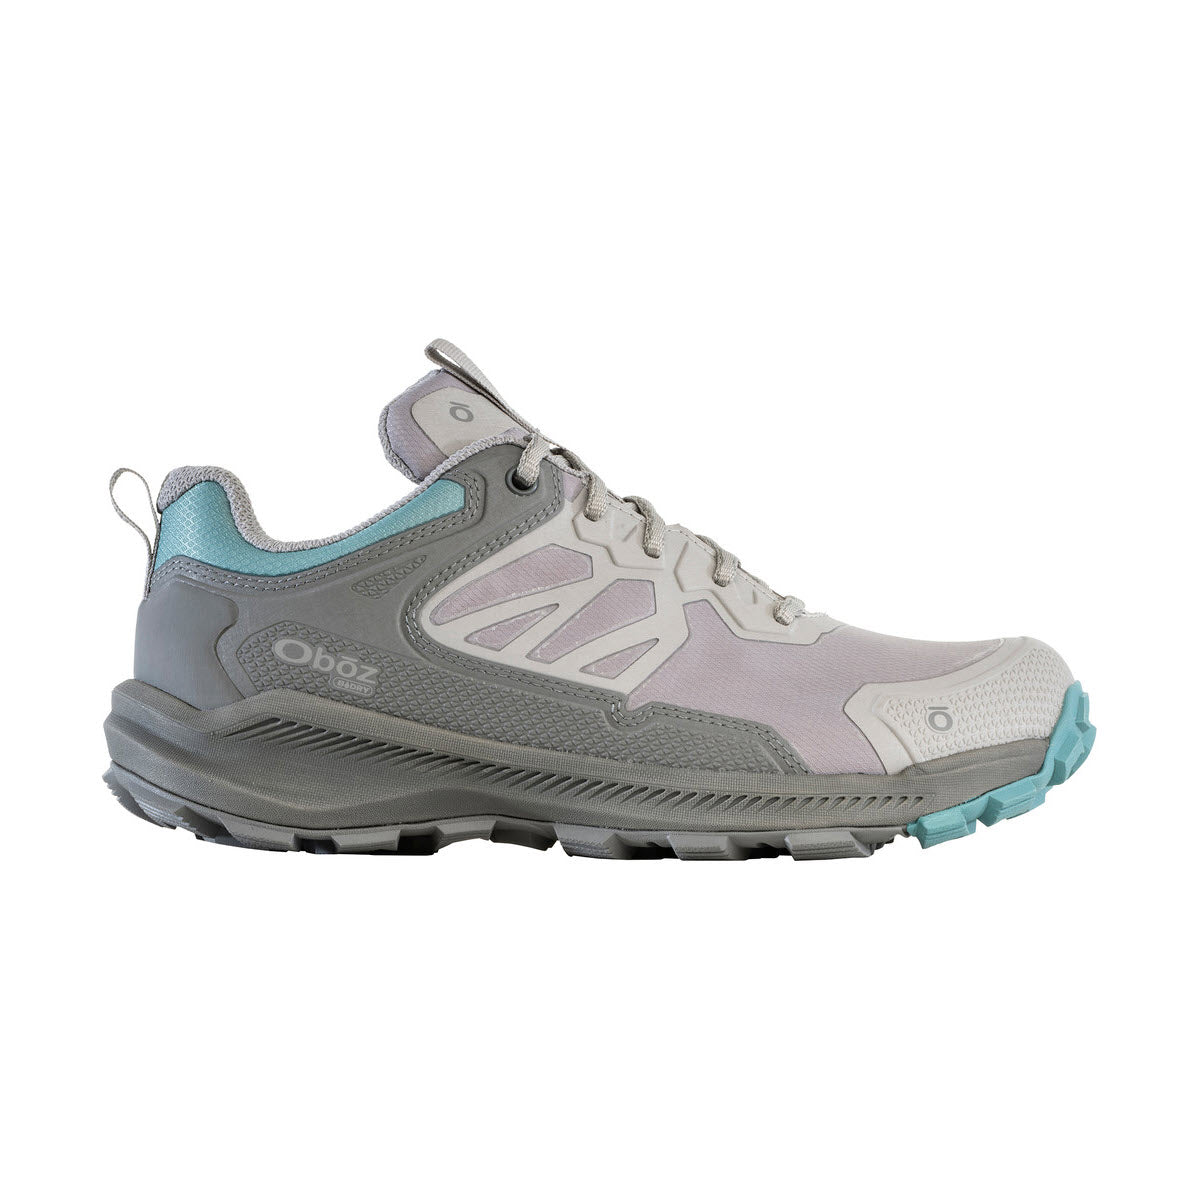 A single grey and blue OBOZ KATABATIC LOW B-DRY ISLAND hiking shoe with the brand label Oboz visible, featuring a breathable membrane.